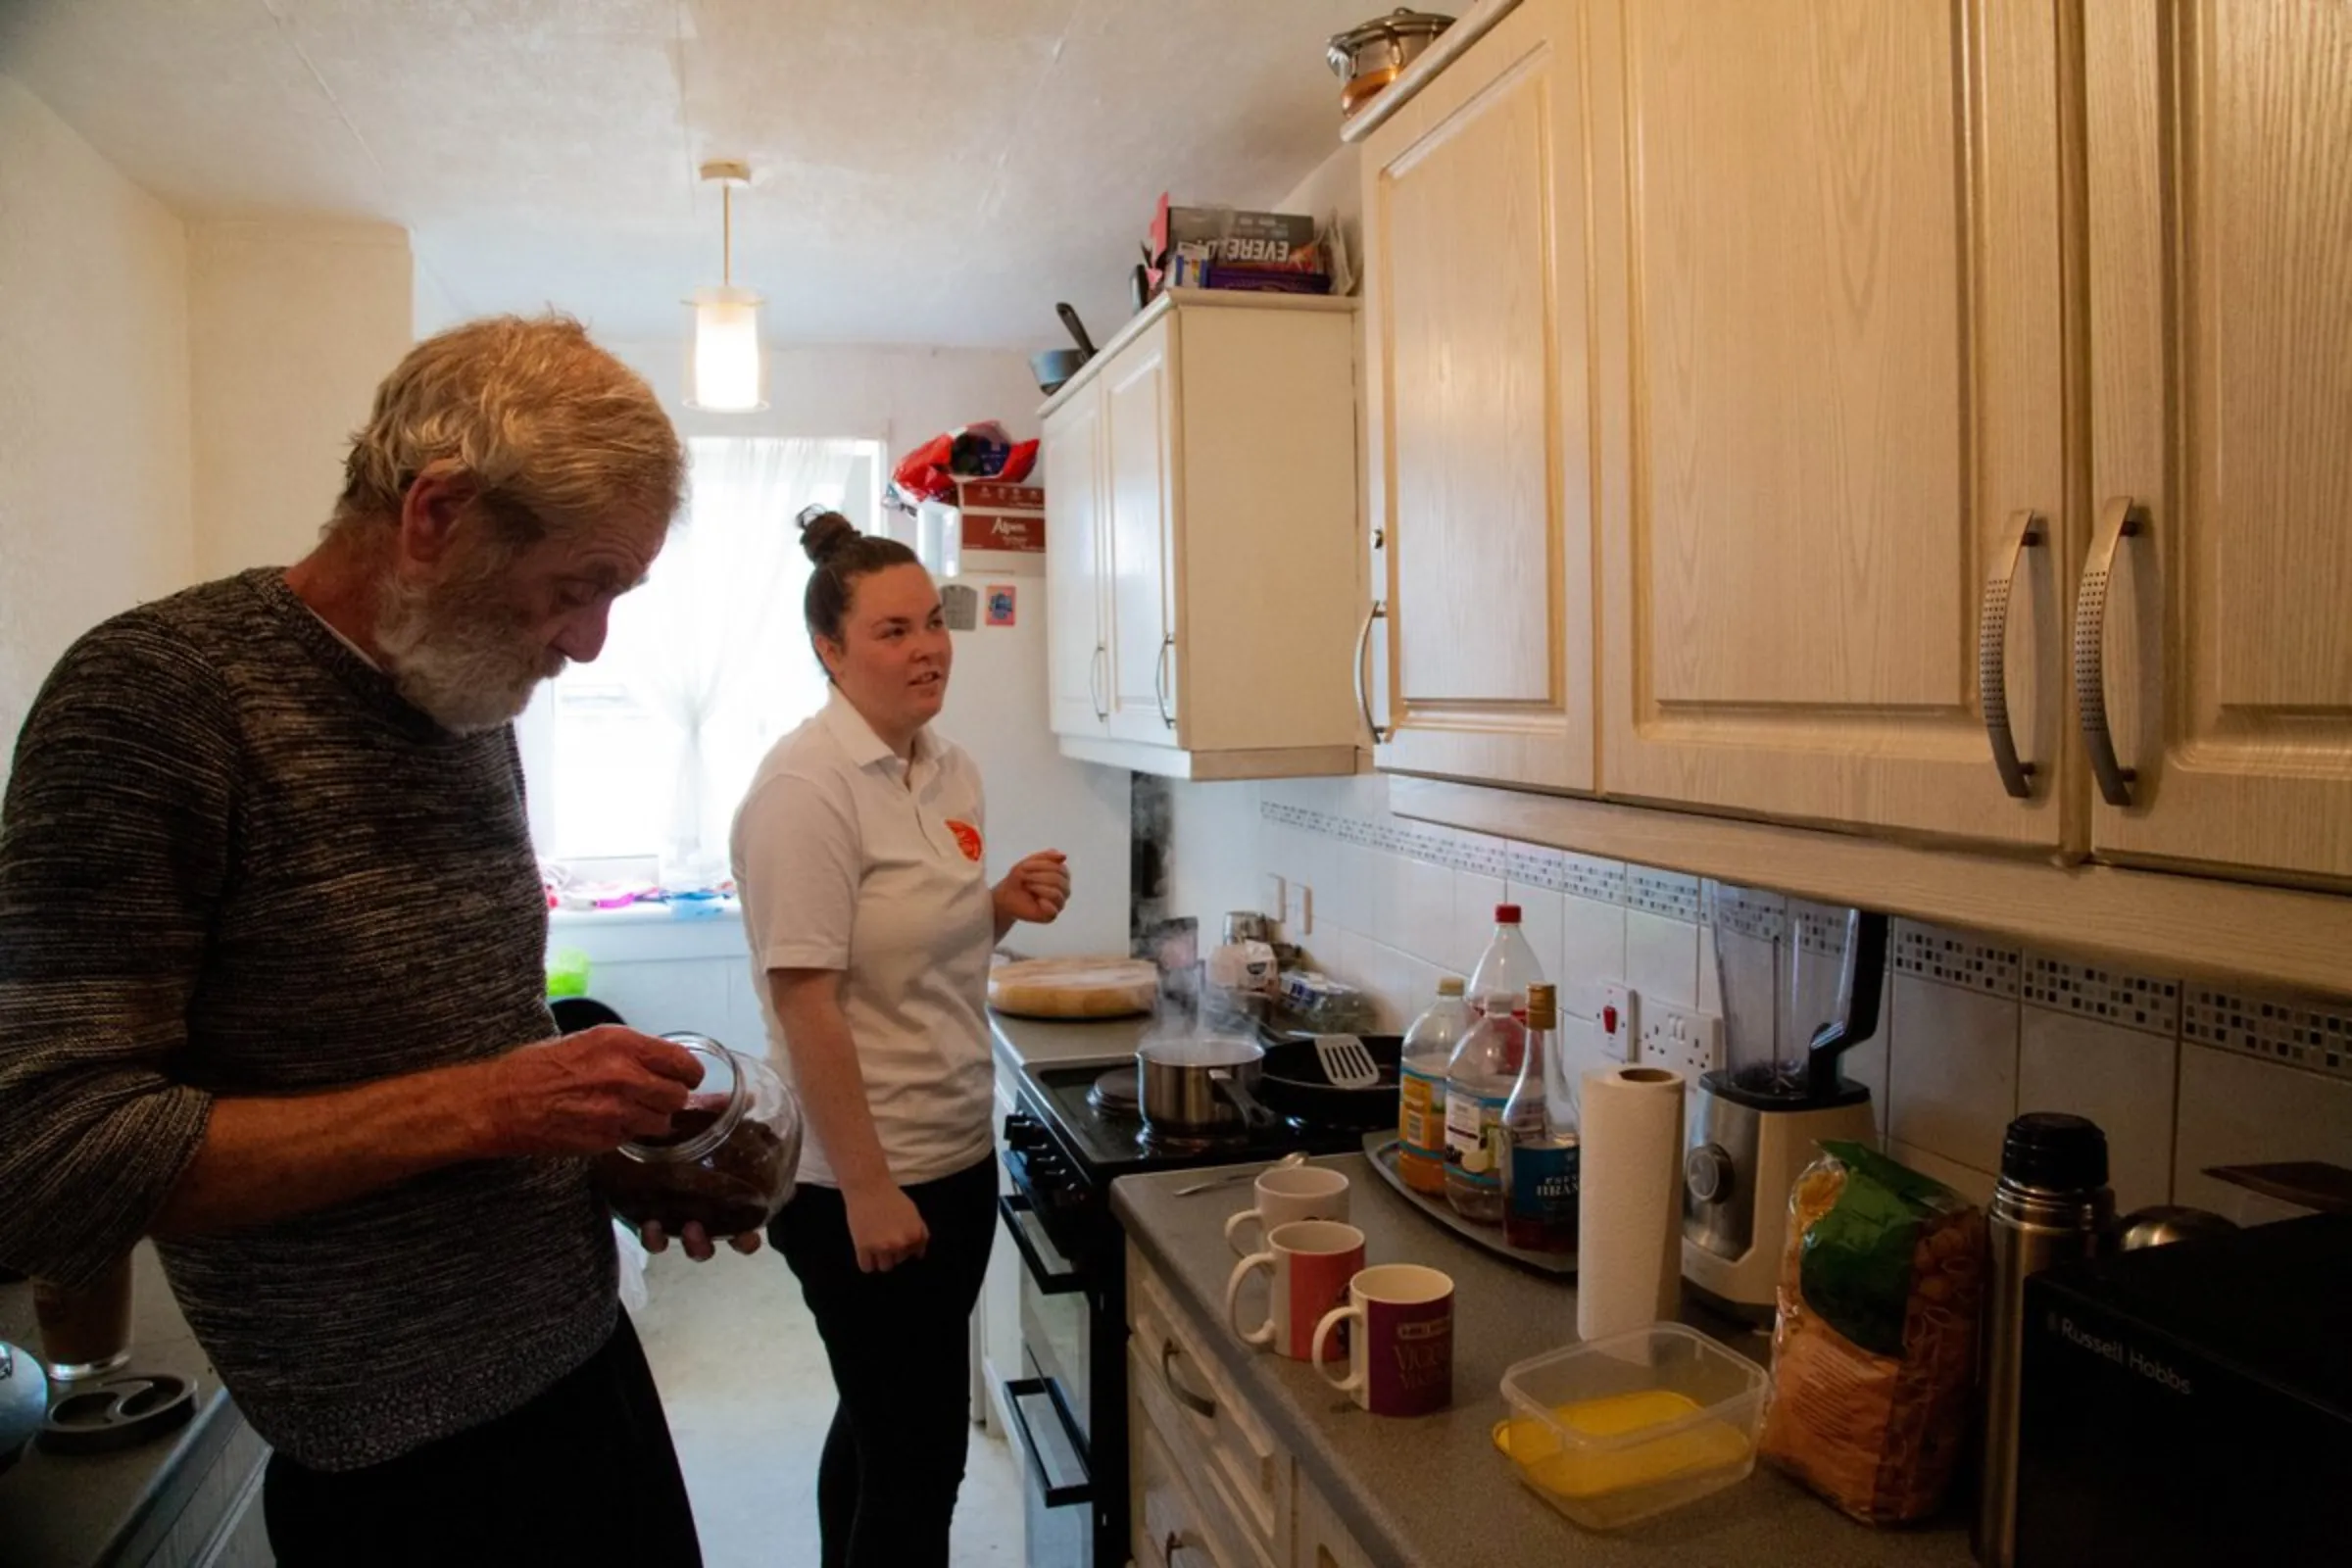 George McGavigan, 62, and his daughter Shelley, 24, make breakfast in their social housing flat in Glasgow, United Kingdom, July 20, 2021. The flat, owned by the Queens Cross Housing Association, has undergone major renovations to improve heat efficiency